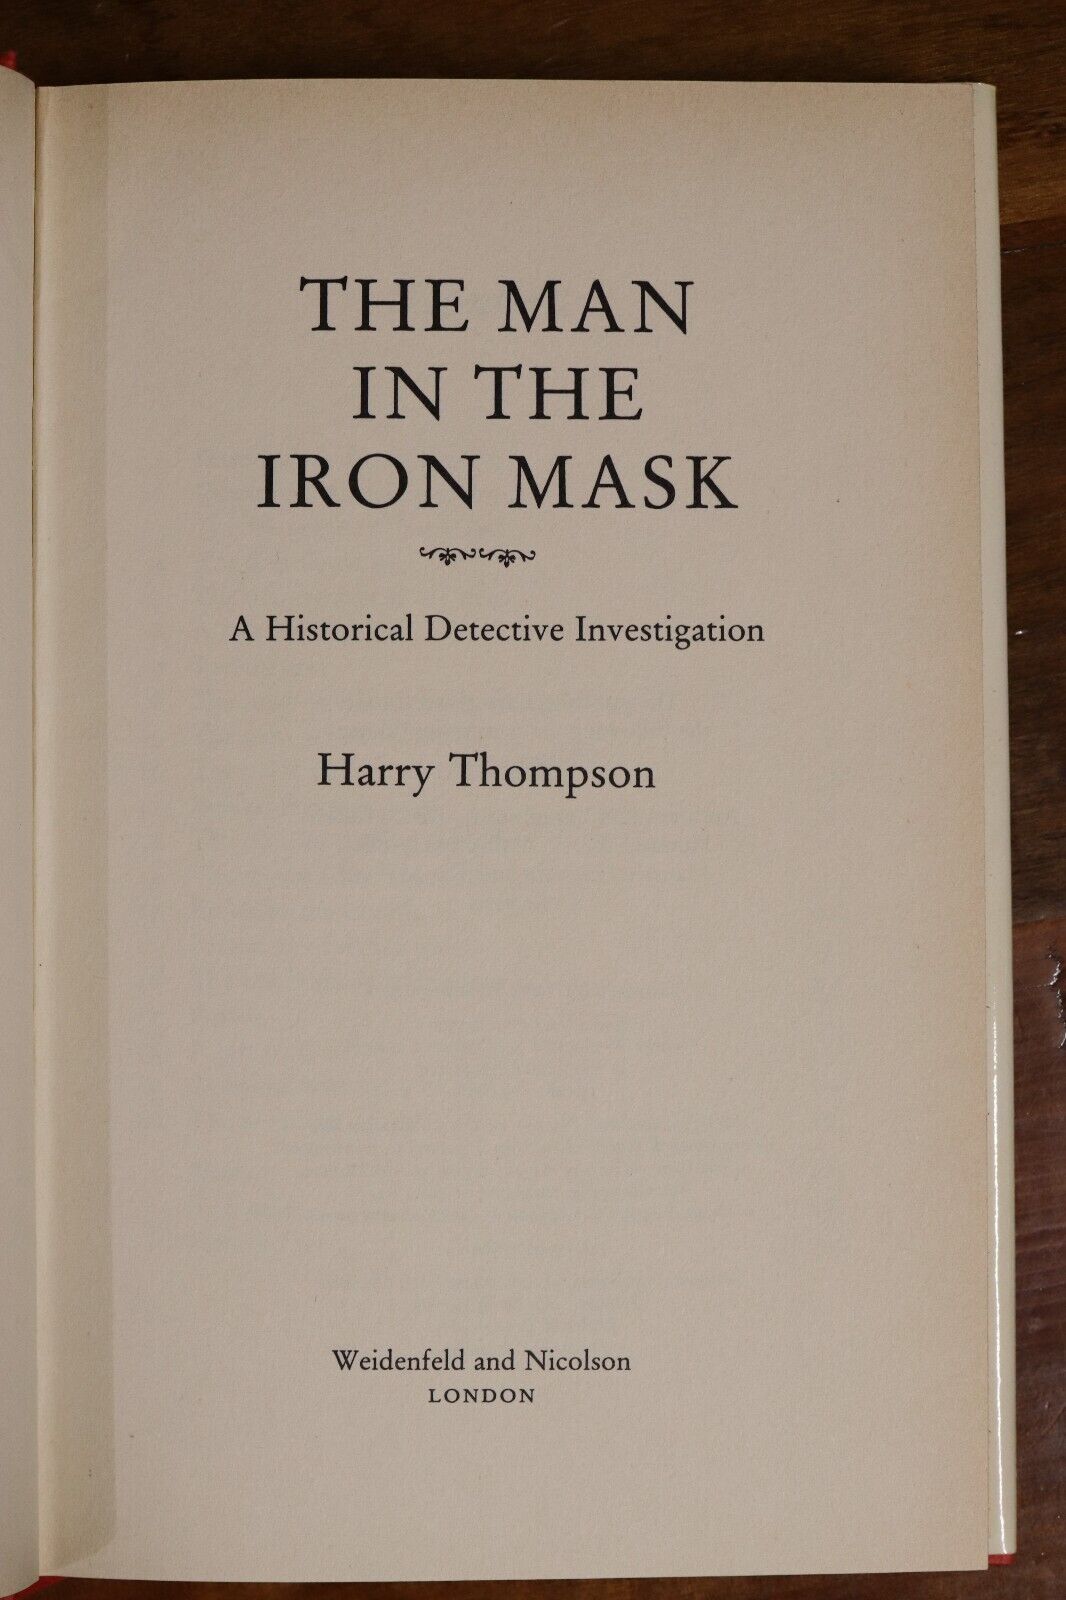 The Man In The Iron Mask by H Thompson - 1987 - Historical Detective Book